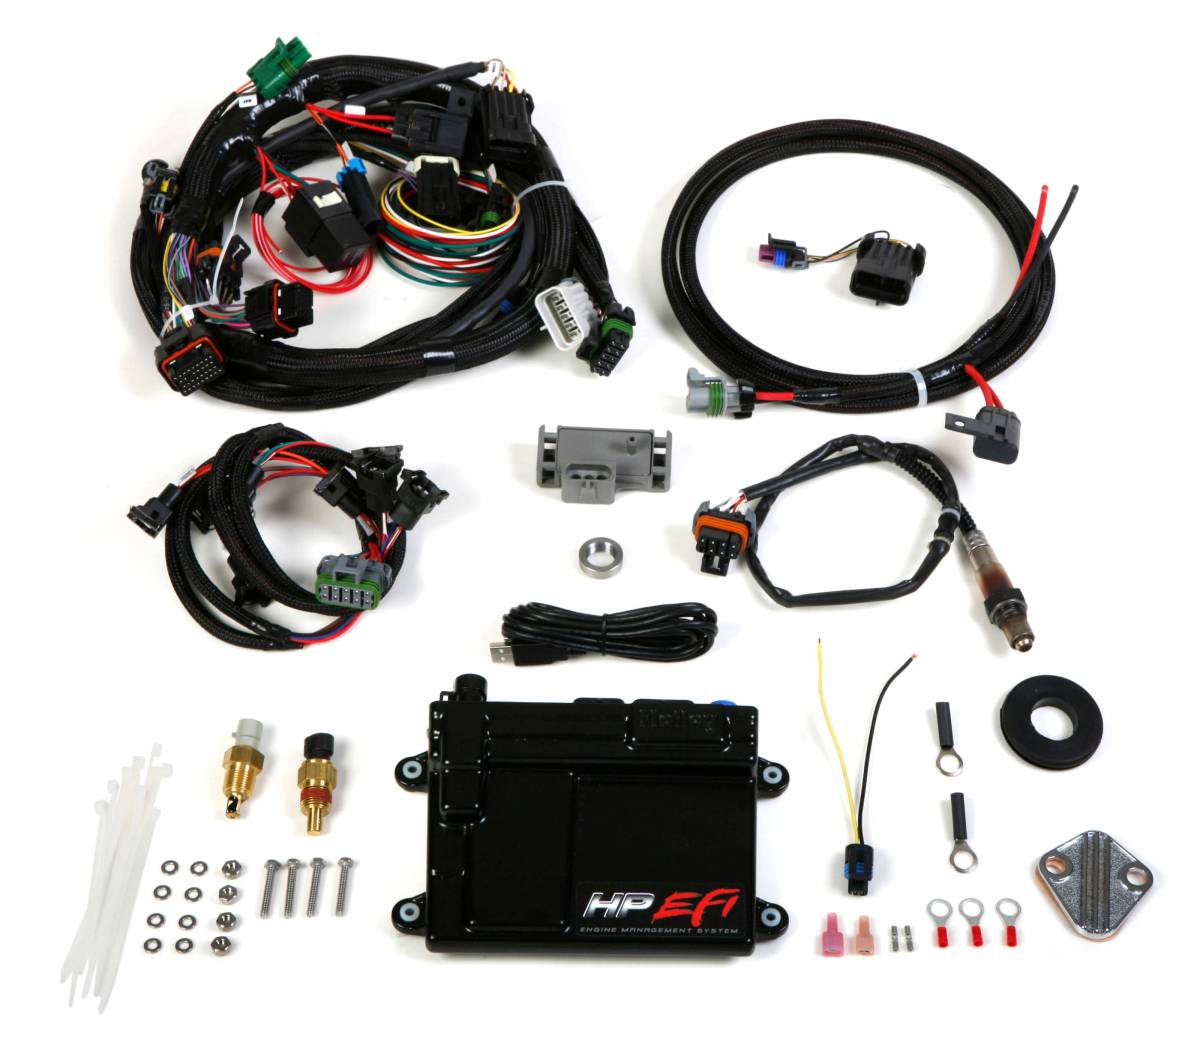 Holley - Holley HP EFI ECU and Harness Kit for GM TPI with EV1 Connectors - Bosch O2 Sensor - Image 1